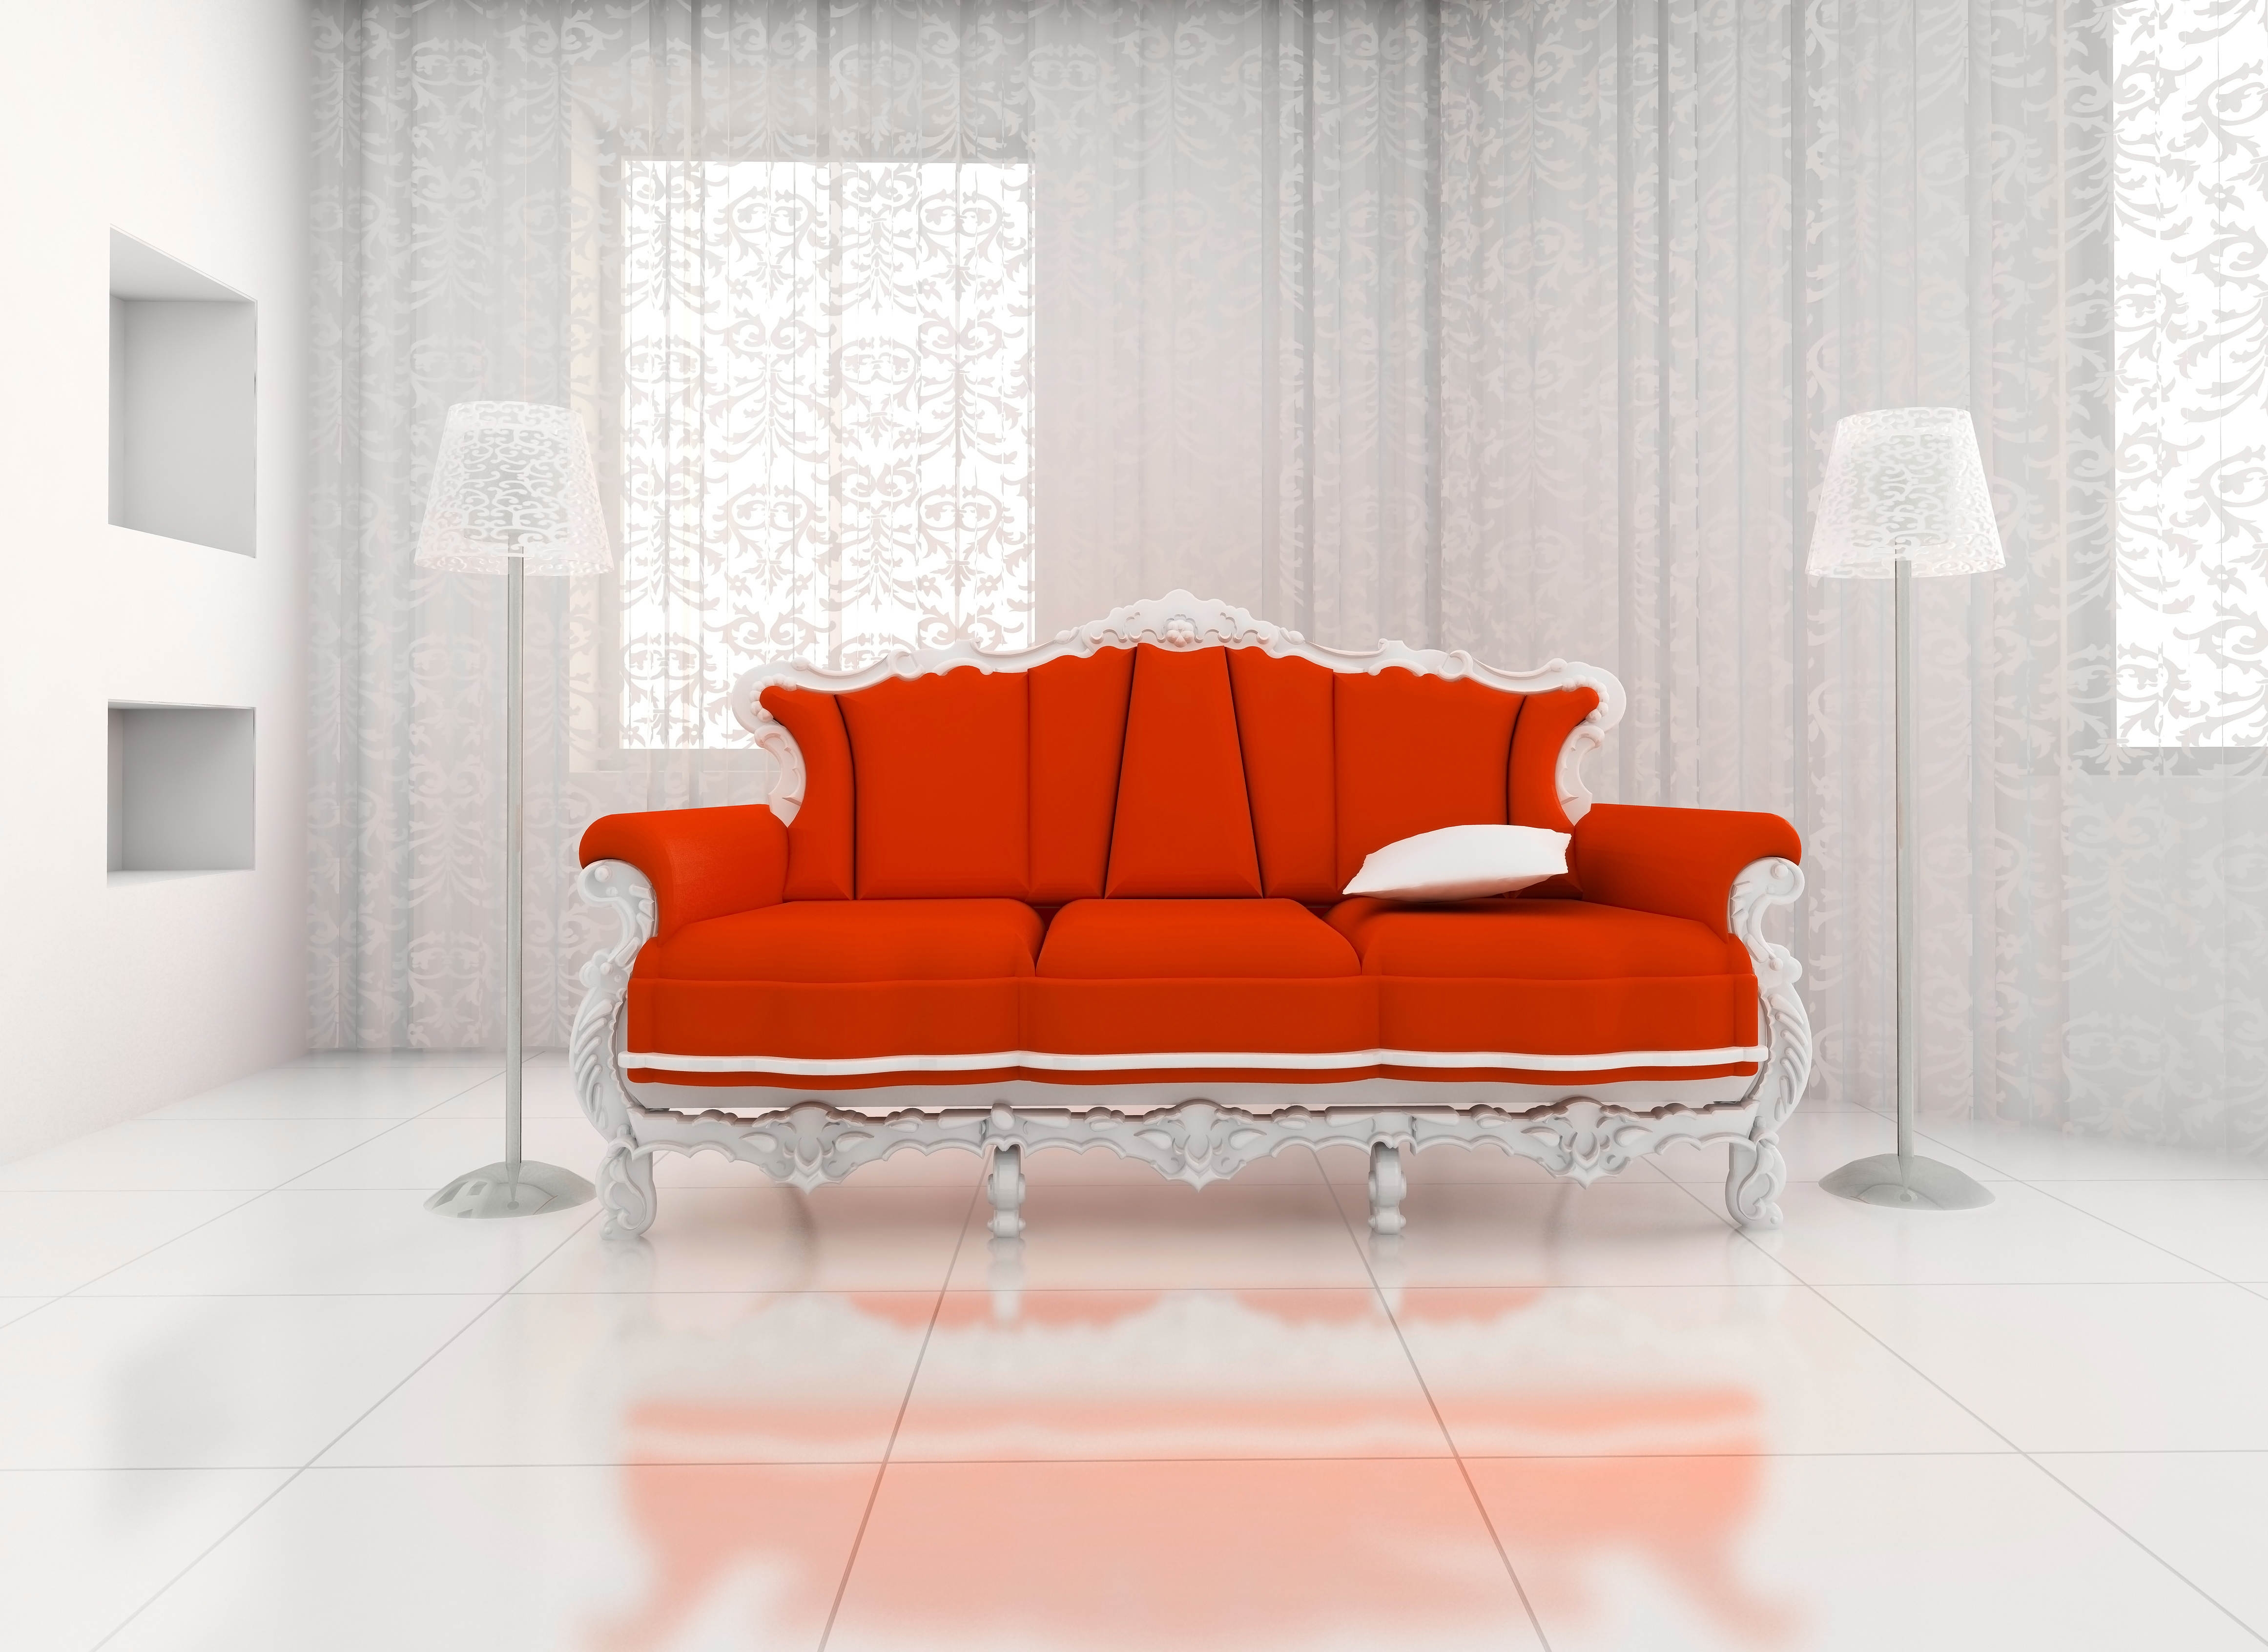 Sofa Cell Phone Wallpapers